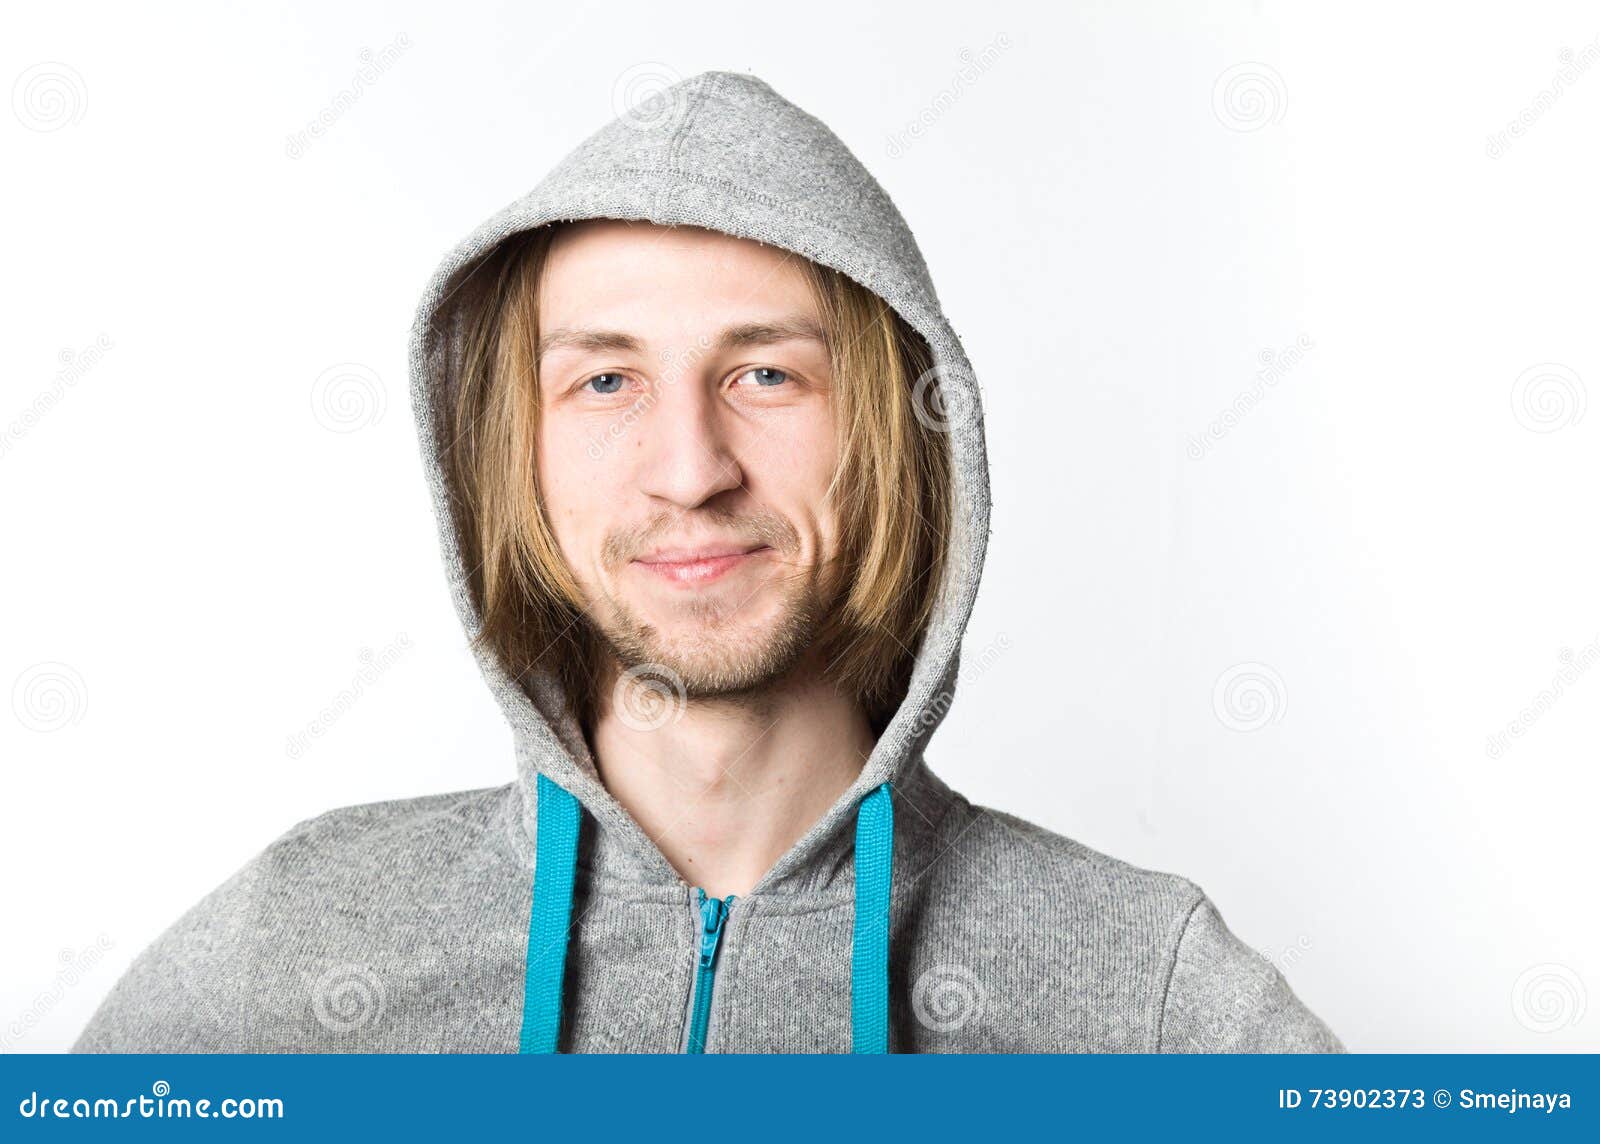 British man with long blond hair - wide 6